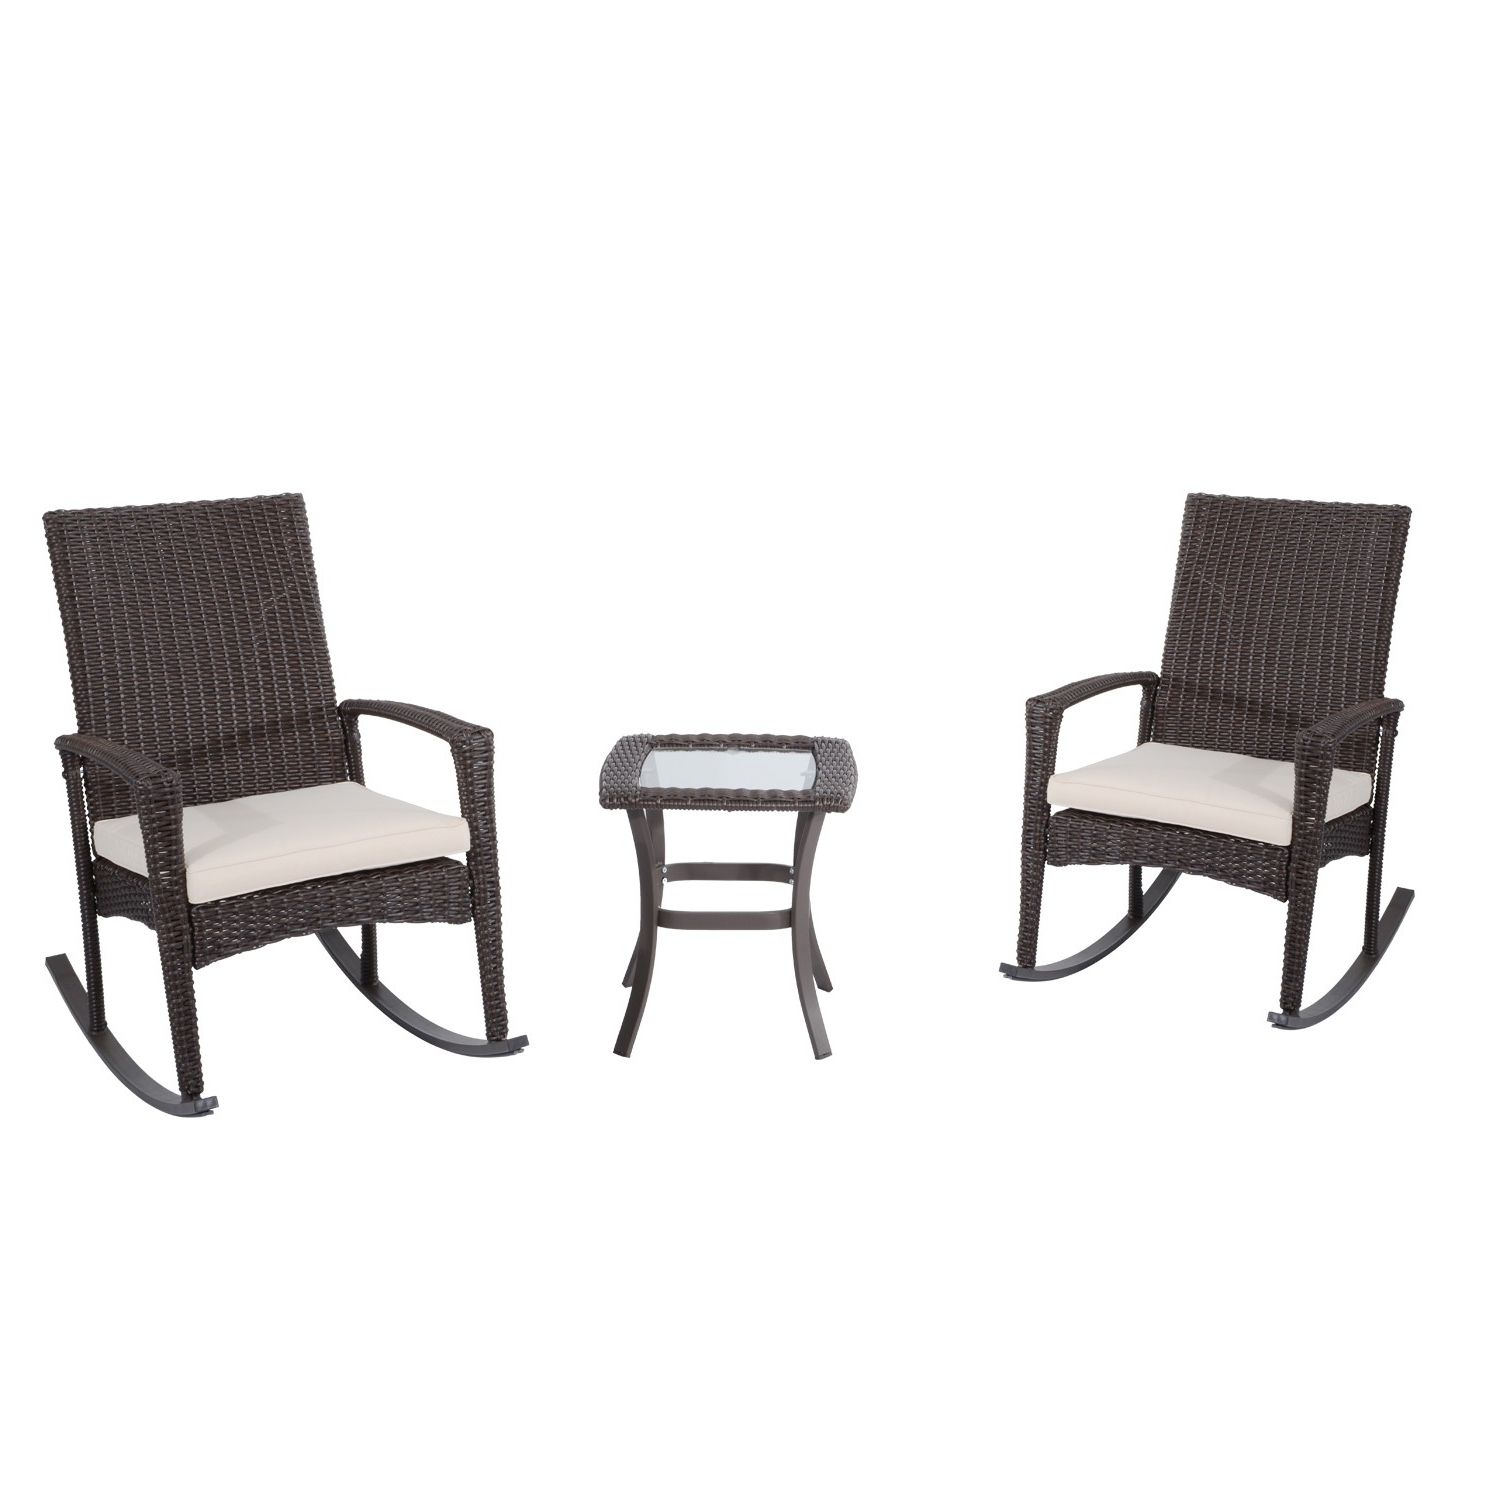 Outsunny 3 Piece Outdoor Rocking Chair And Table Set – Gifts Under $300 For Favorite Outdoor Rocking Chairs With Table (View 15 of 15)